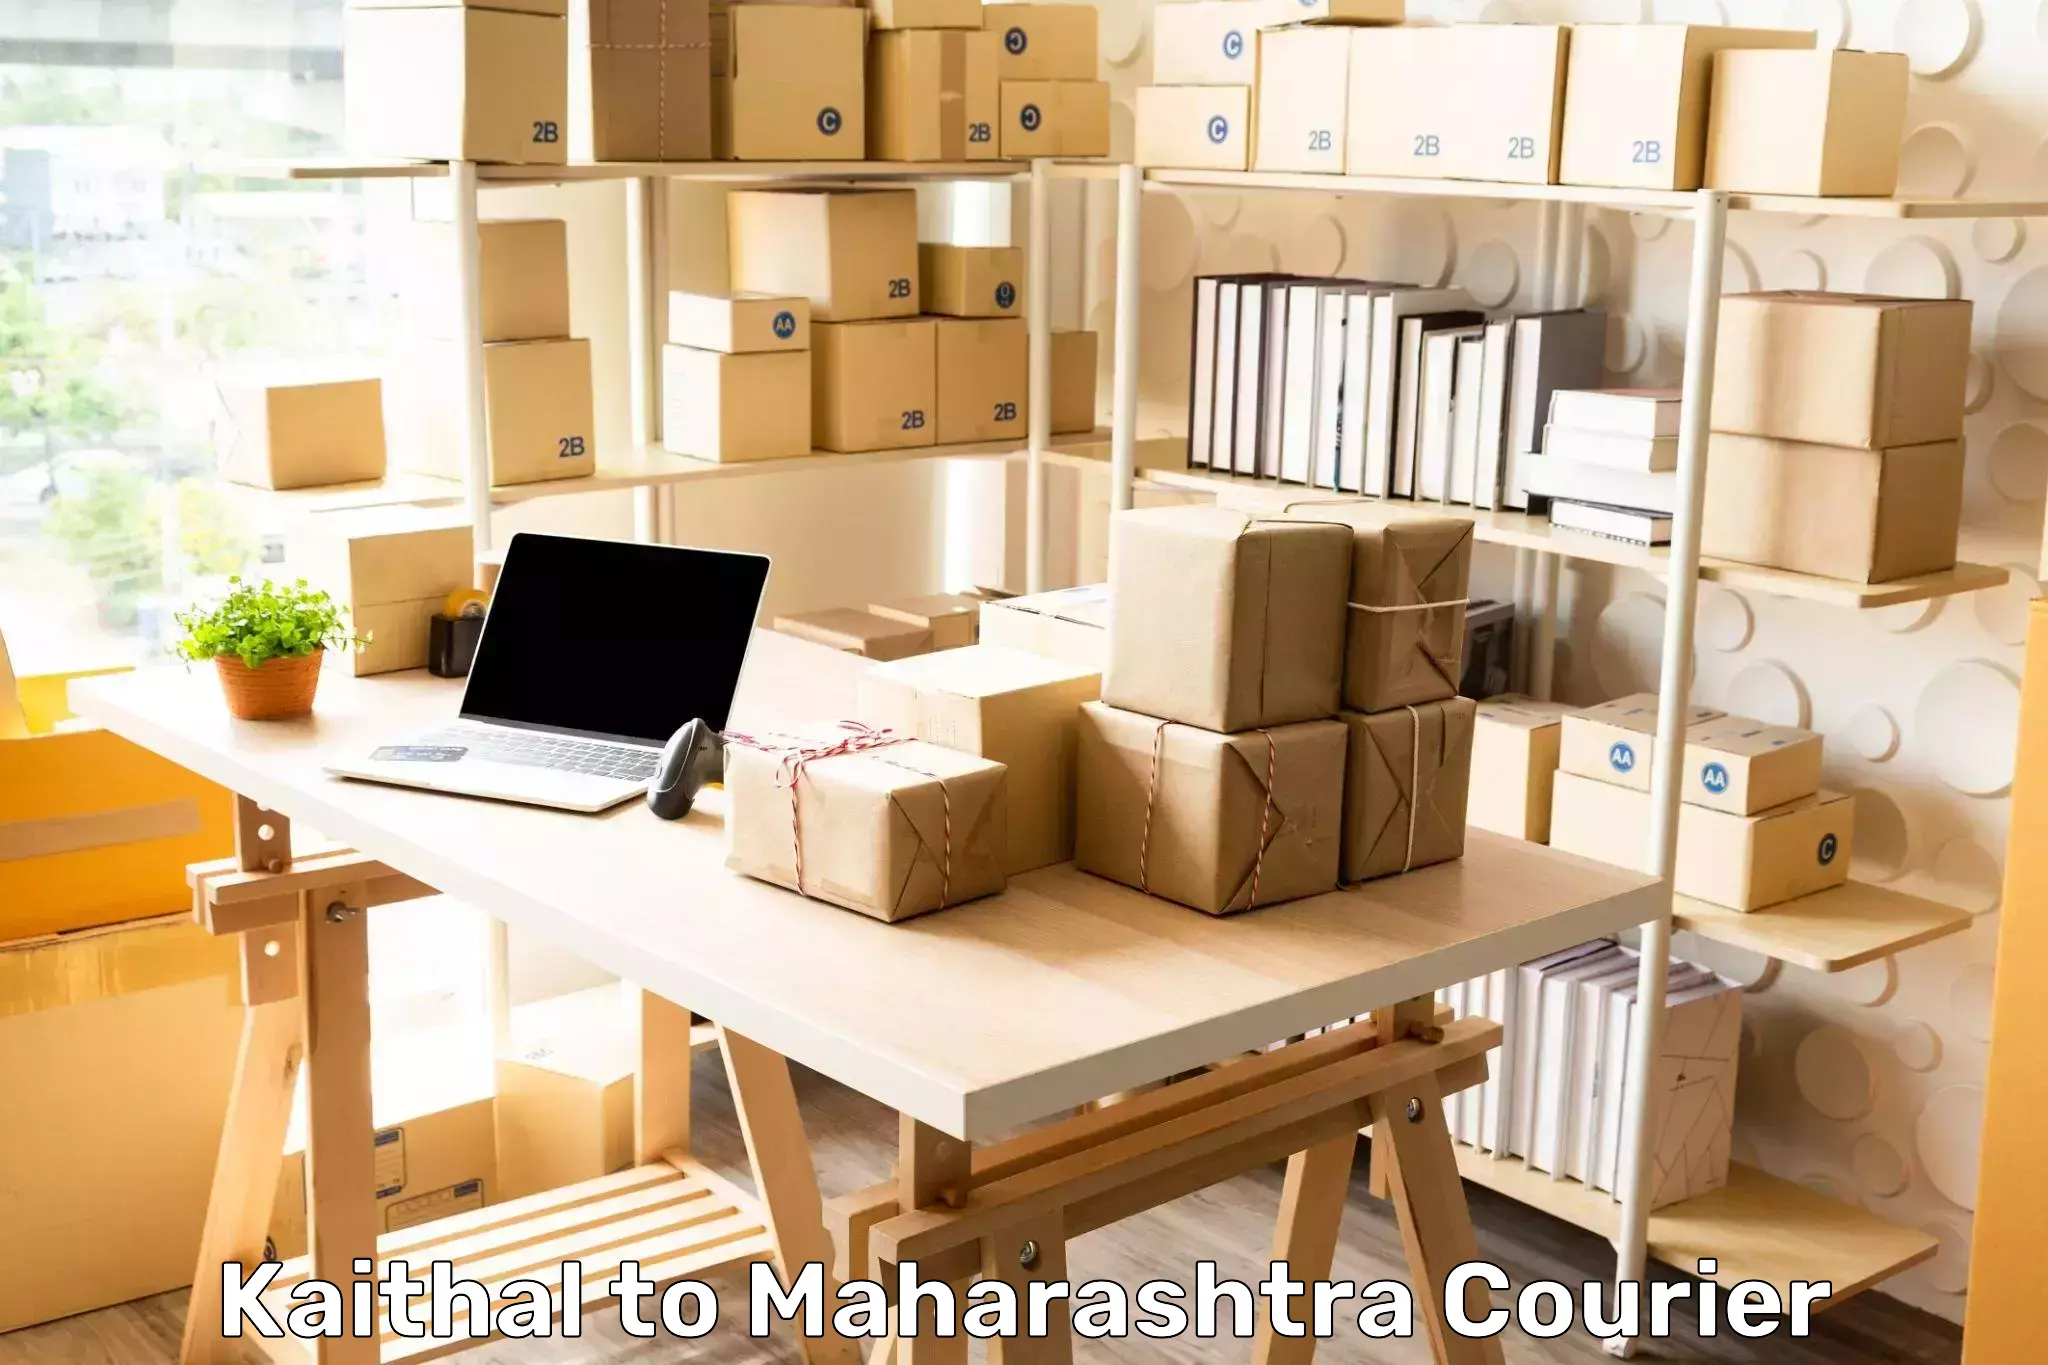 Efficient courier operations in Kaithal to Chandwad